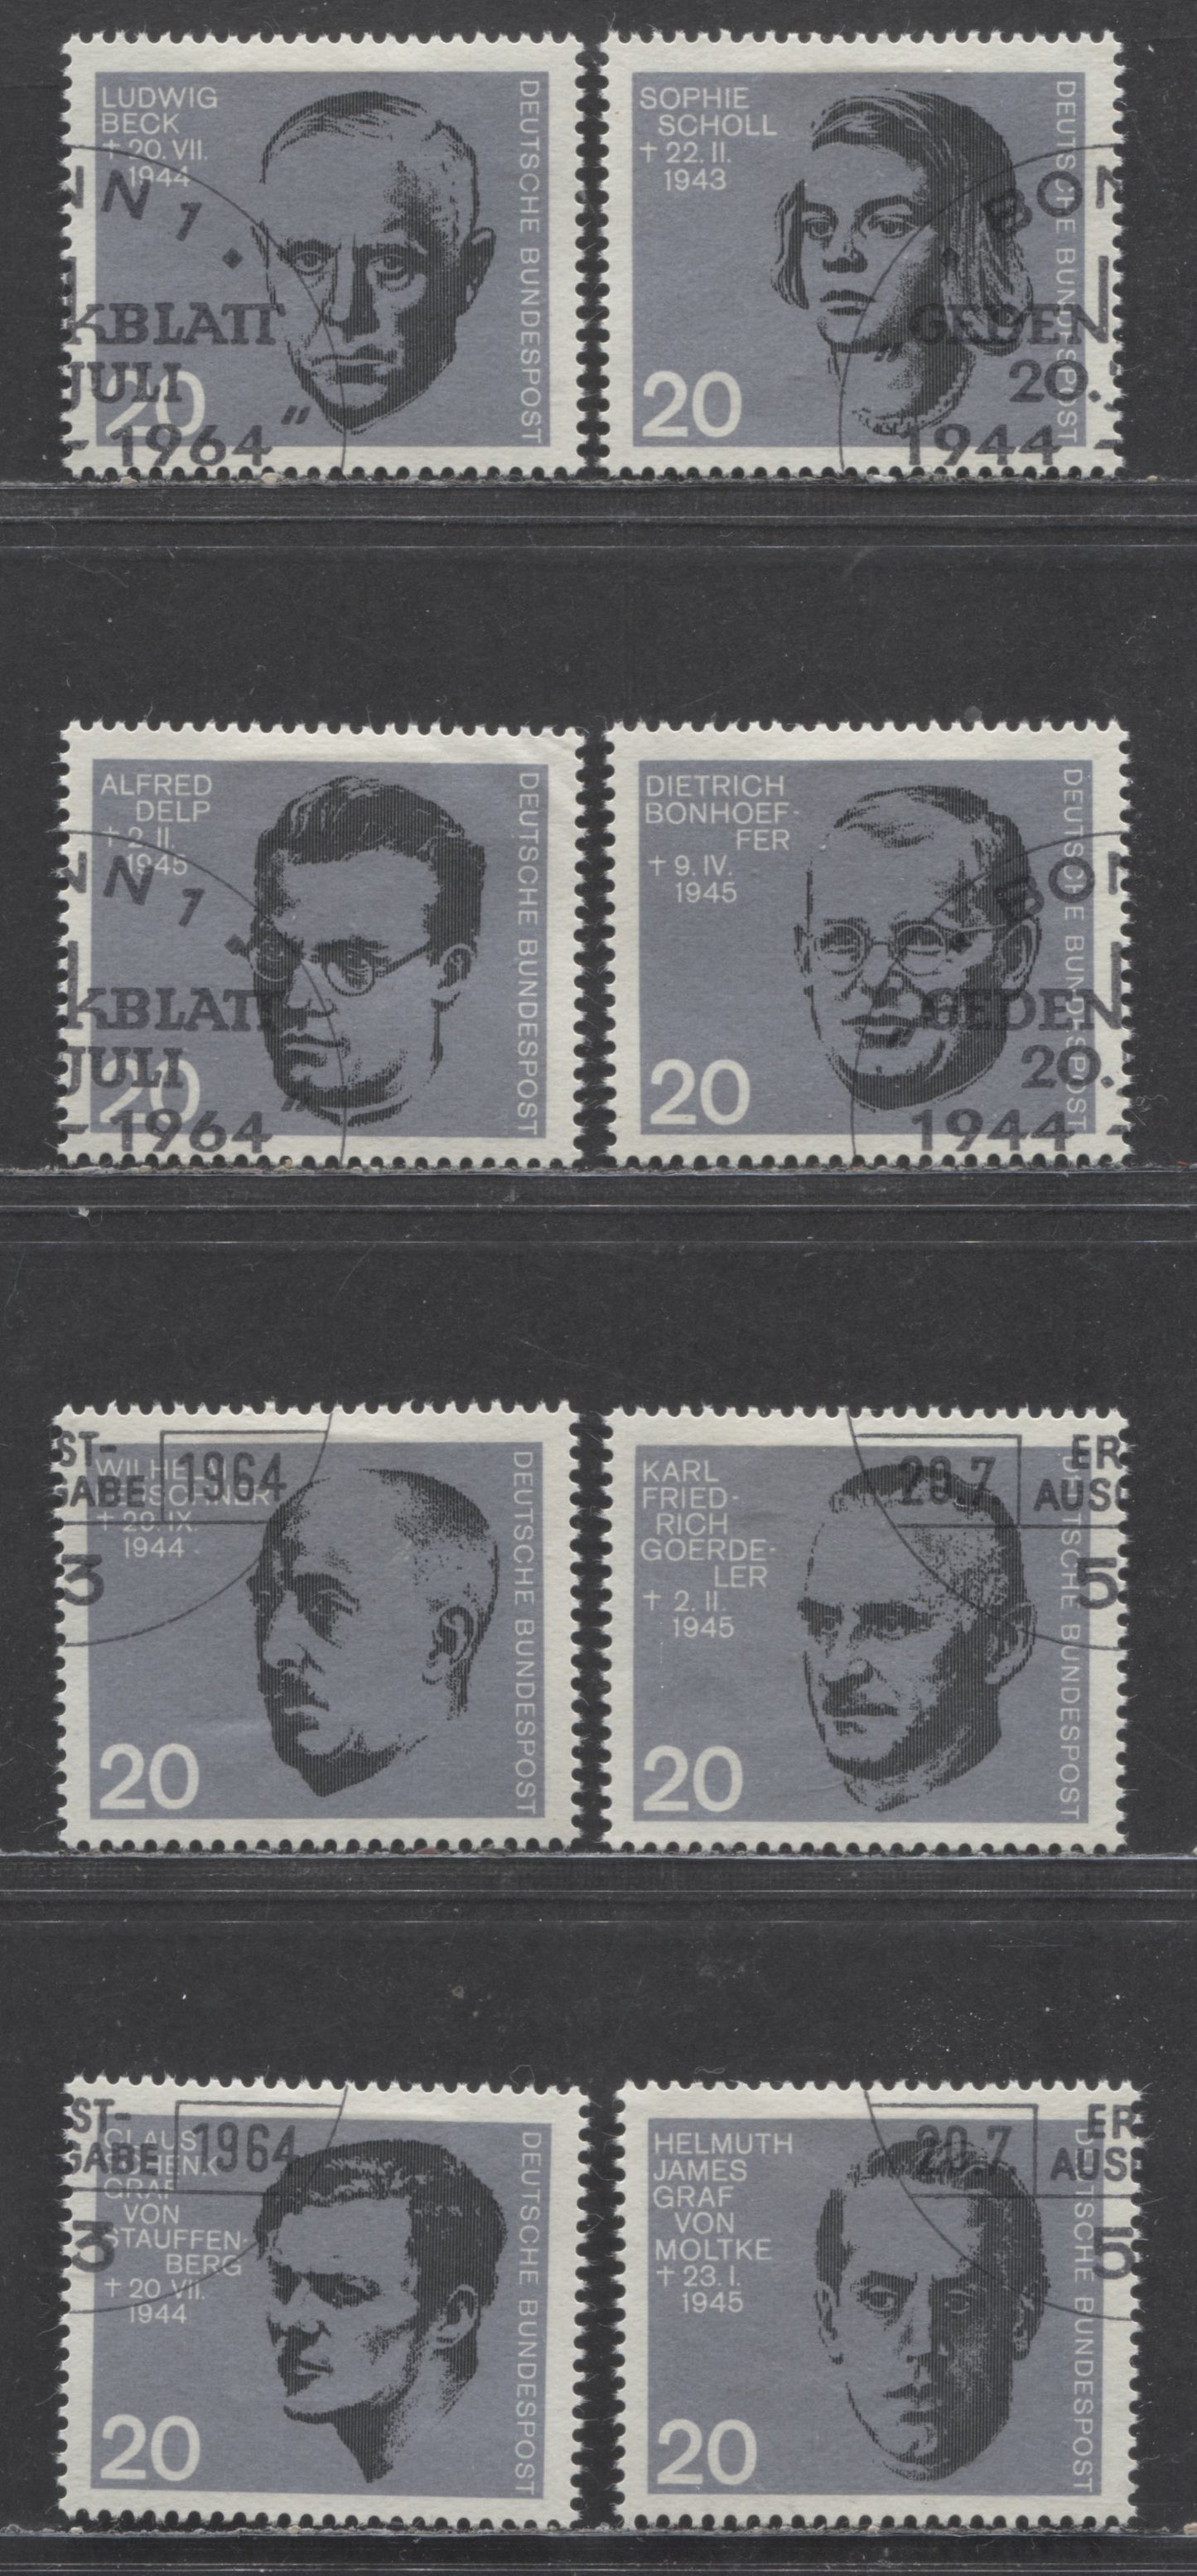 Lot 73 Germany Mi#431 (SC#883)-438 (SC#890) 1964 German Resistance Issue, CTO With Special Commemorative Cancels, 8 Very Fine Used Singles, Click on Listing to See ALL Pictures, Estimated Value $10